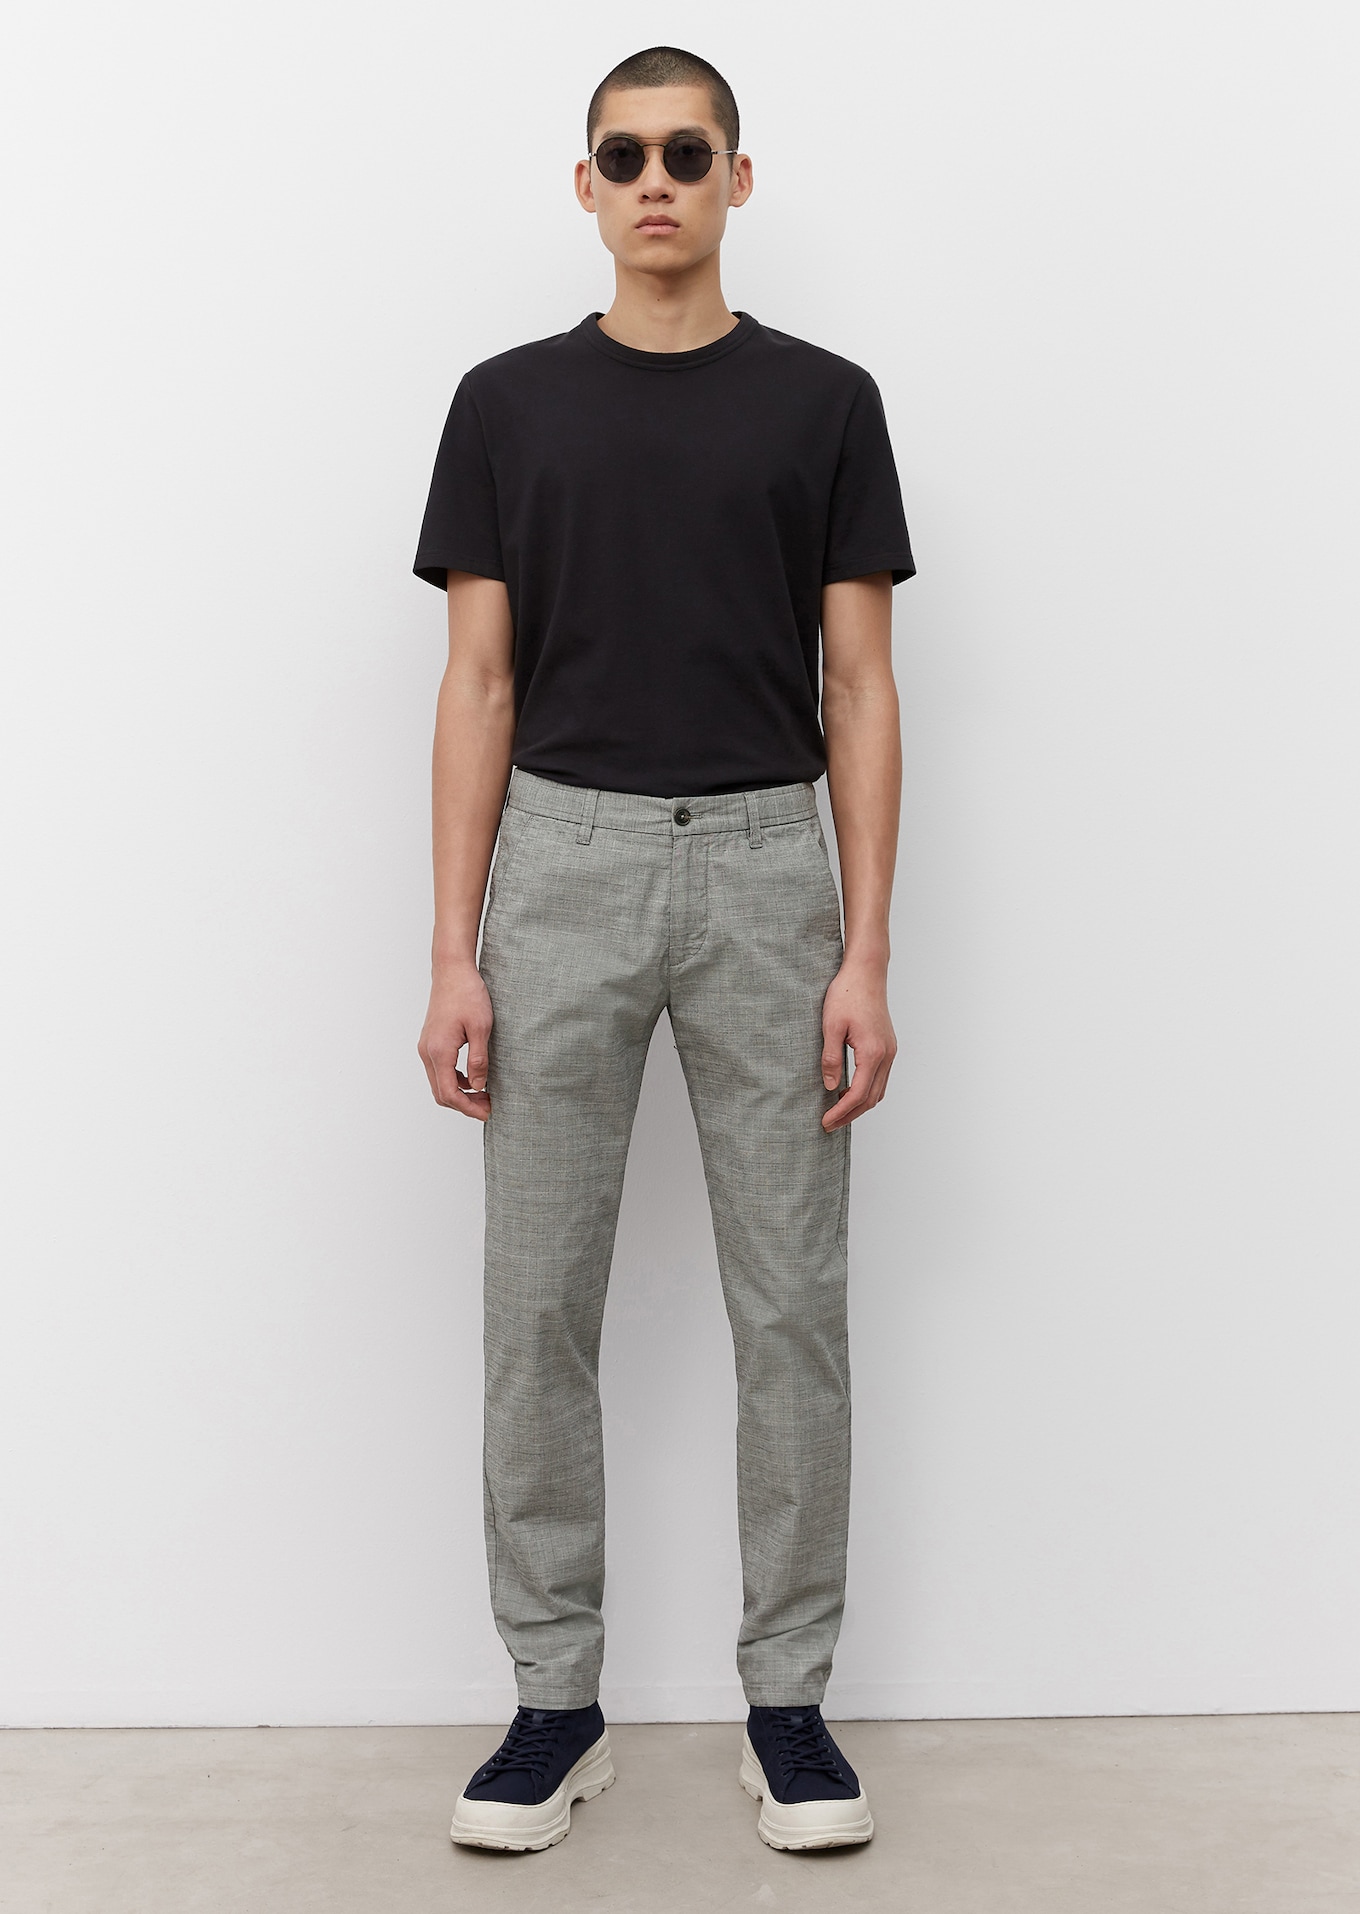 STIG JOGGER chinos made of blended organic cotton - gray | Trousers ...